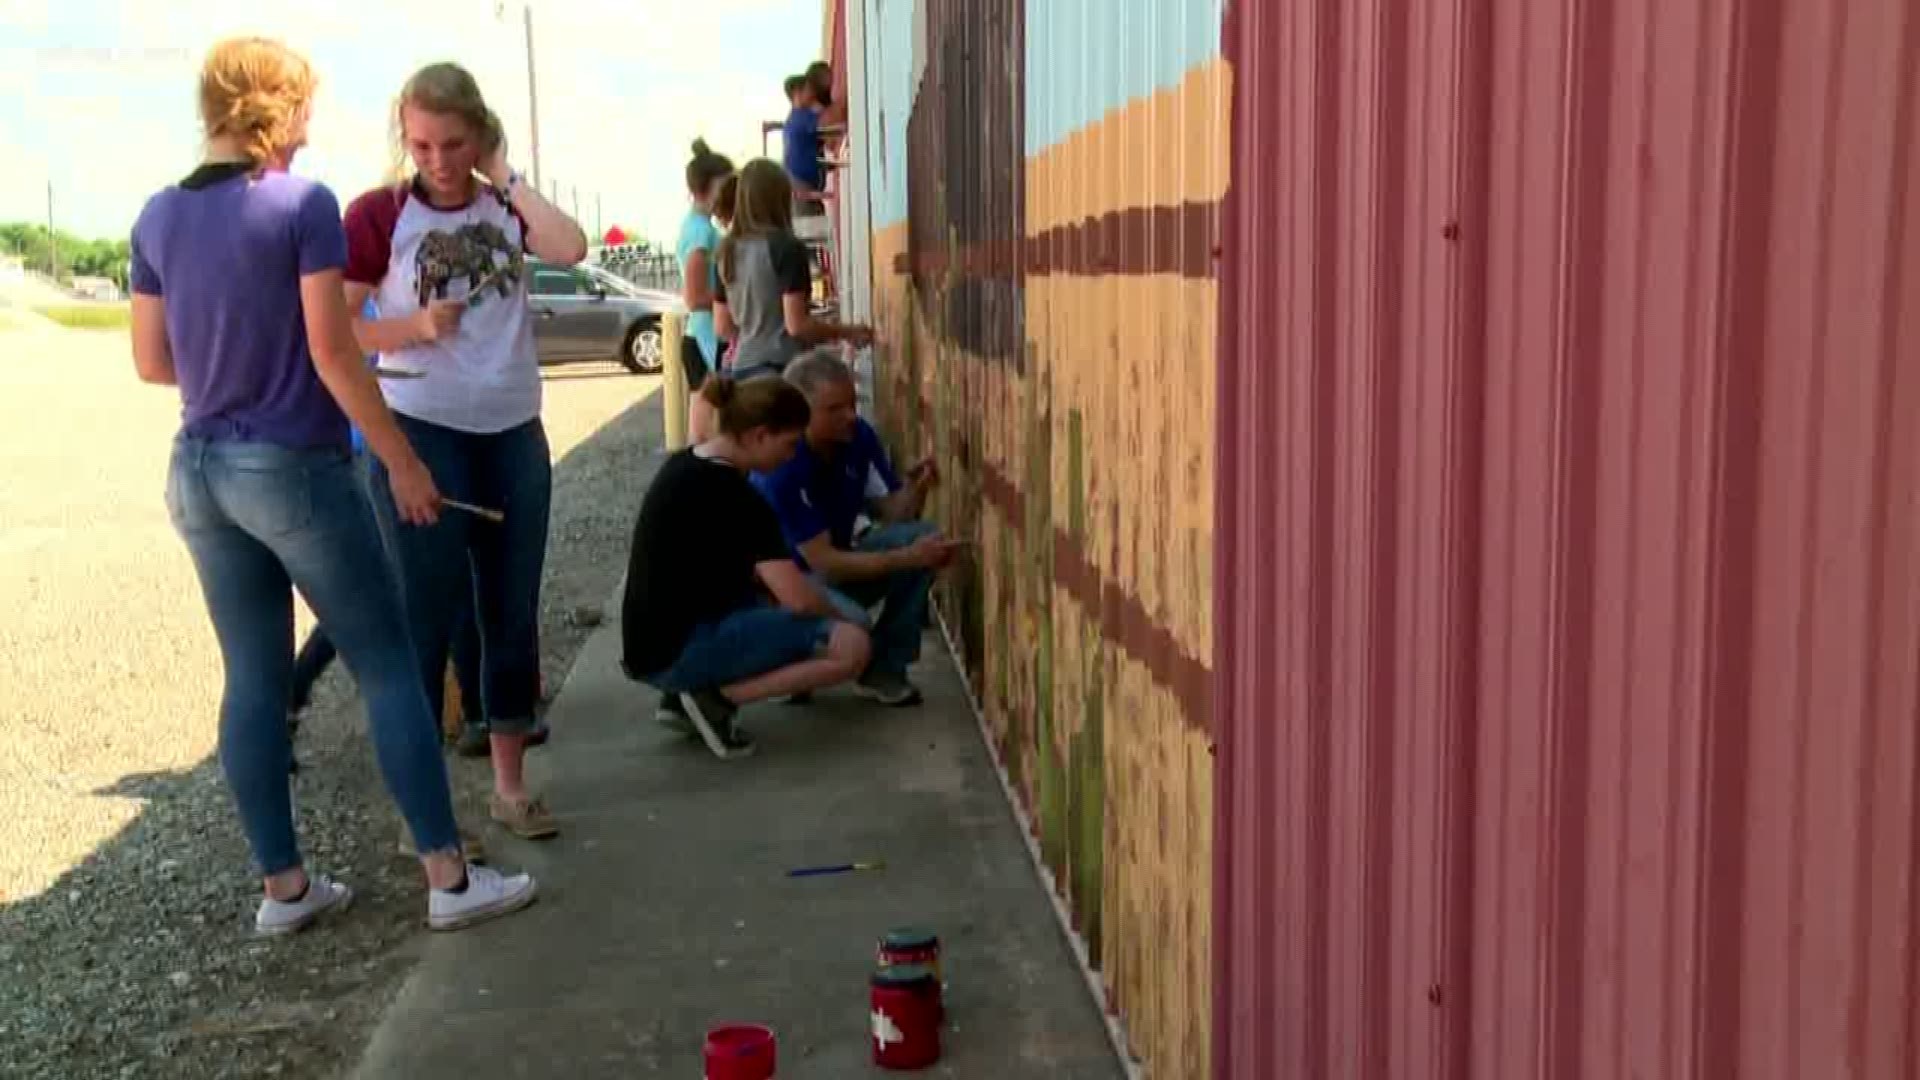 Celeste students breathing life into dying city 